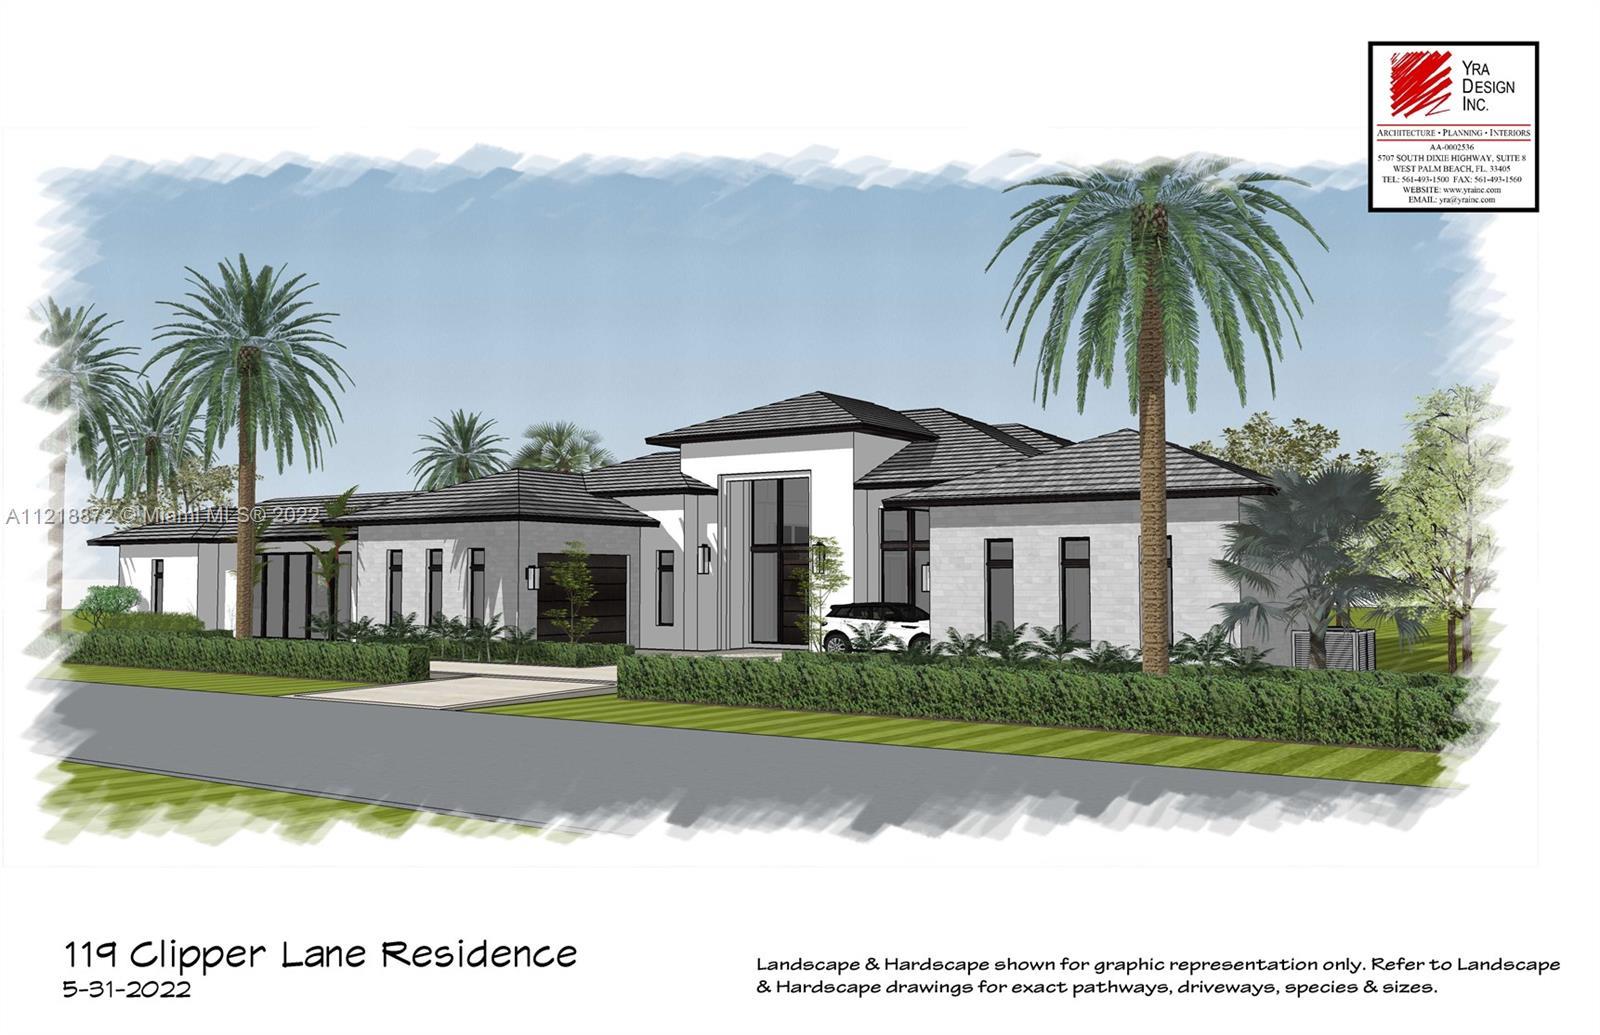 New Construction – Premier Golf Course Lot in Admirals Cove This single-story compound 4 bedroom, 4.